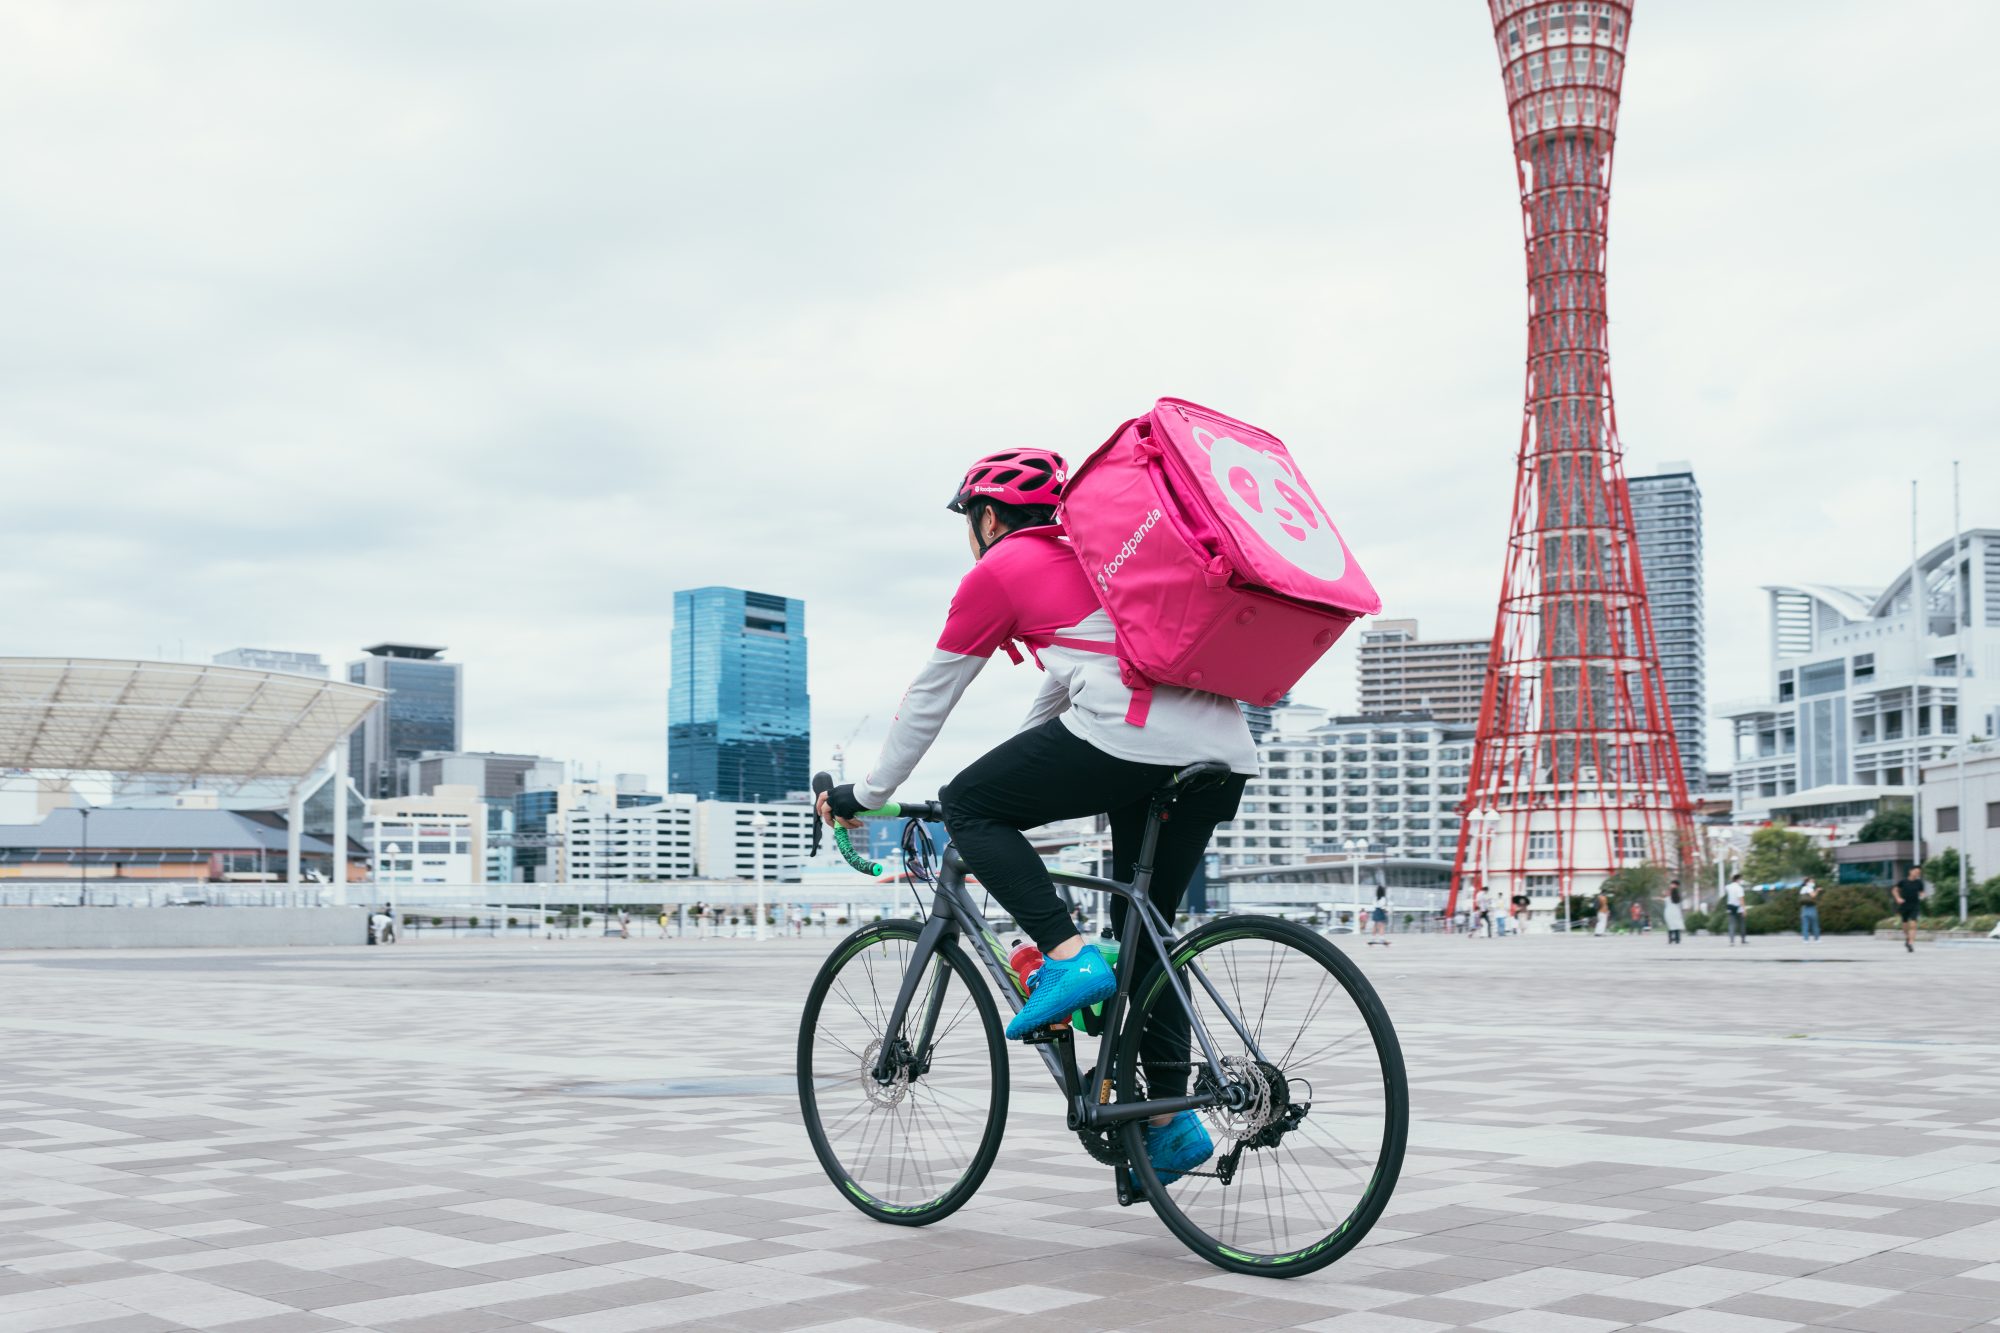 Delivery Hero launches online food delivery and quick commerce in Japan under its brand foodpanda